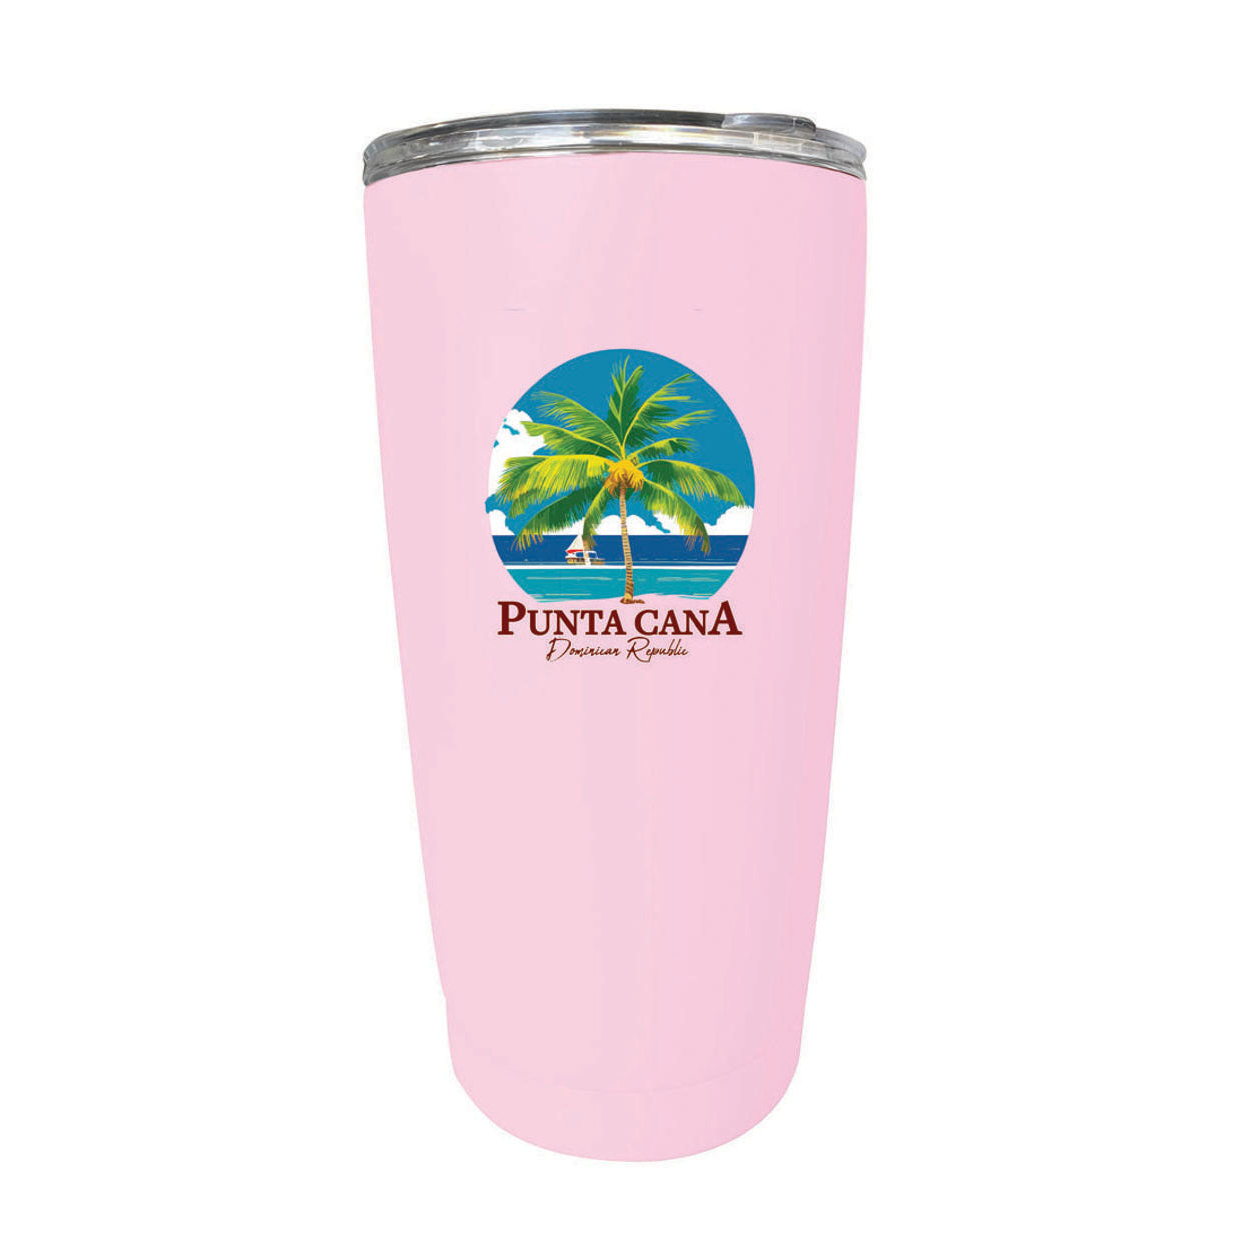 Punta Cana Dominican Republic Souvenir 16 Oz Stainless Steel Insulated Tumbler - Pink, PALM